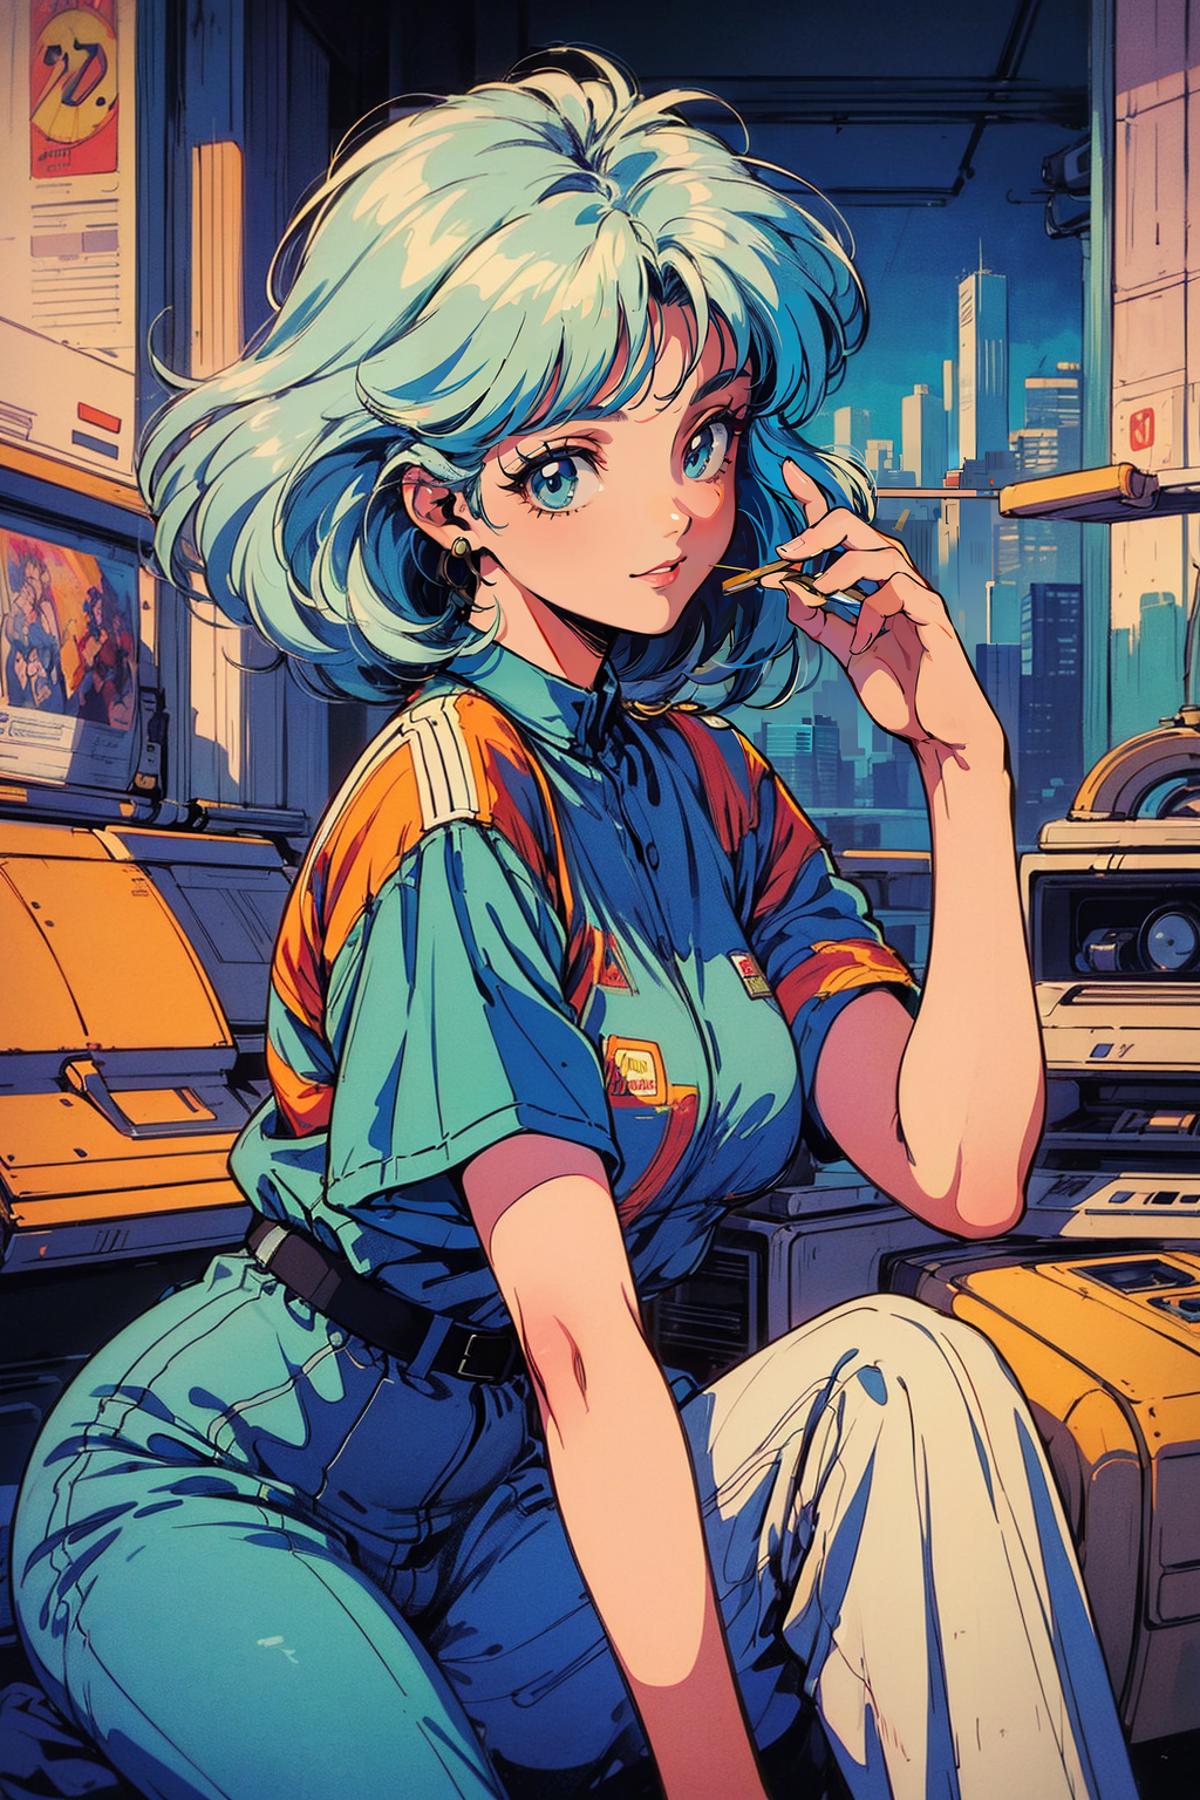 80'sFusion image by BWING